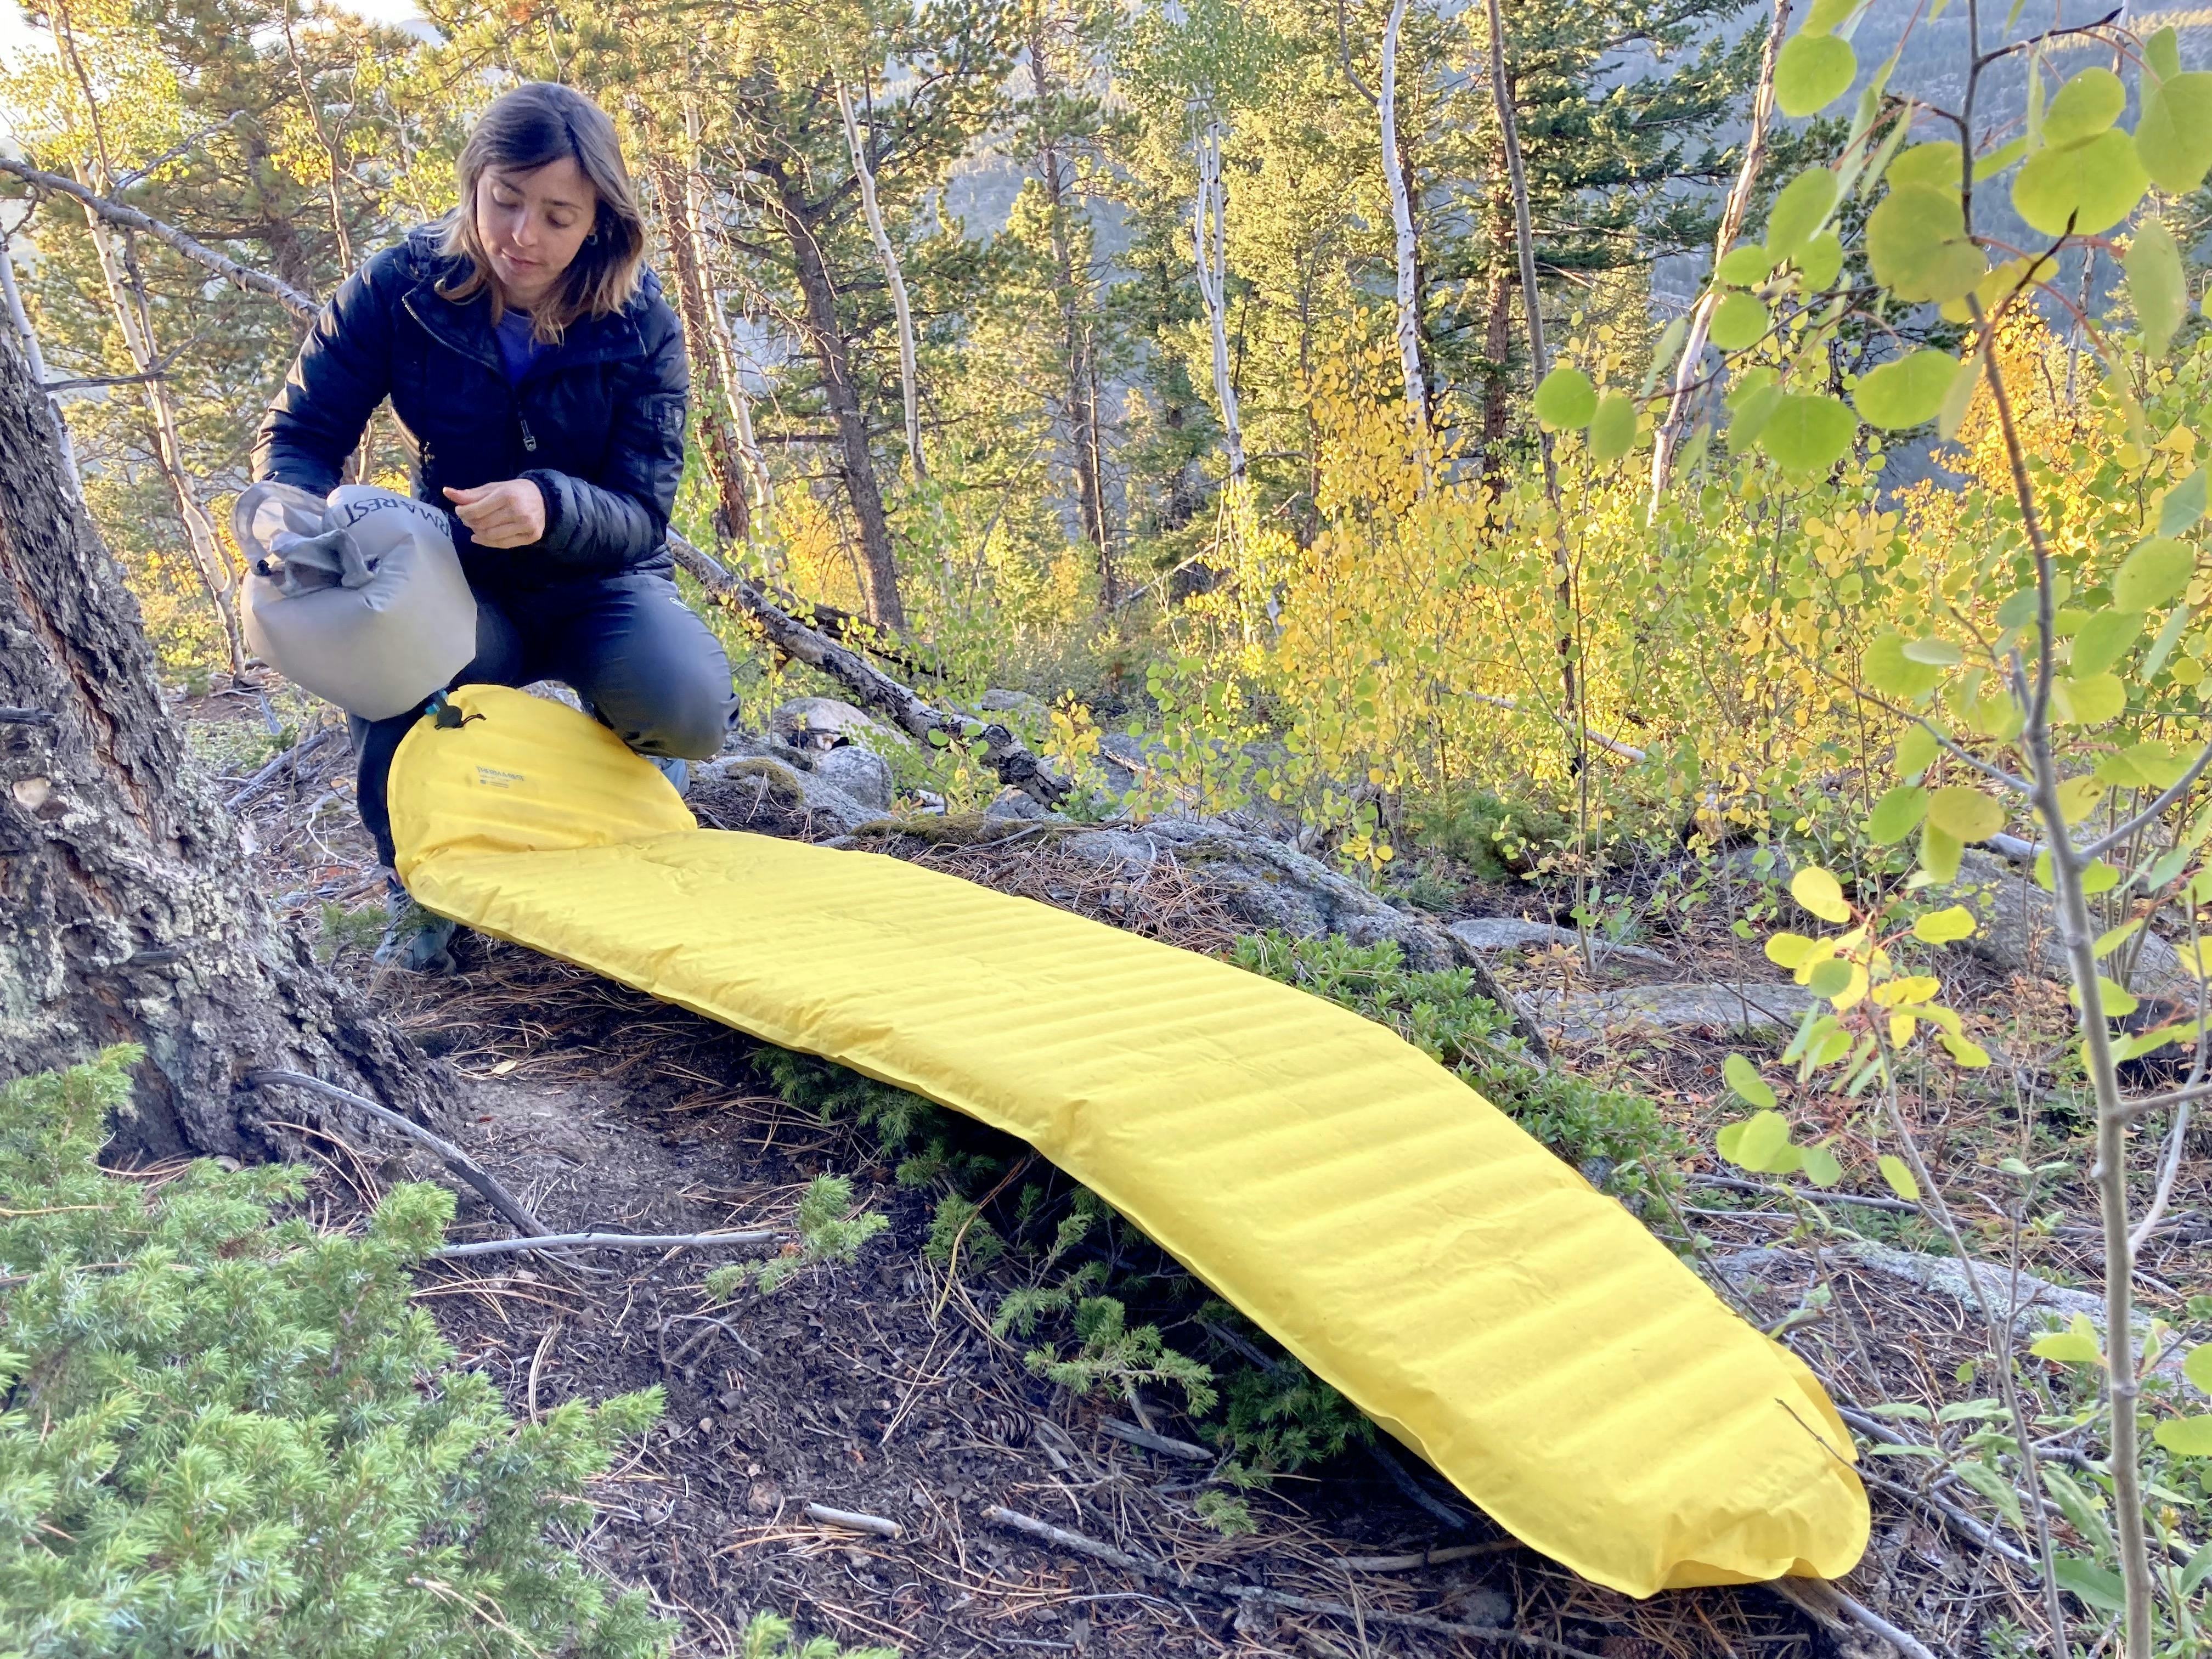 A camper inflating the Therm-a-Rest Neoair Xlite Sleeping Pad.